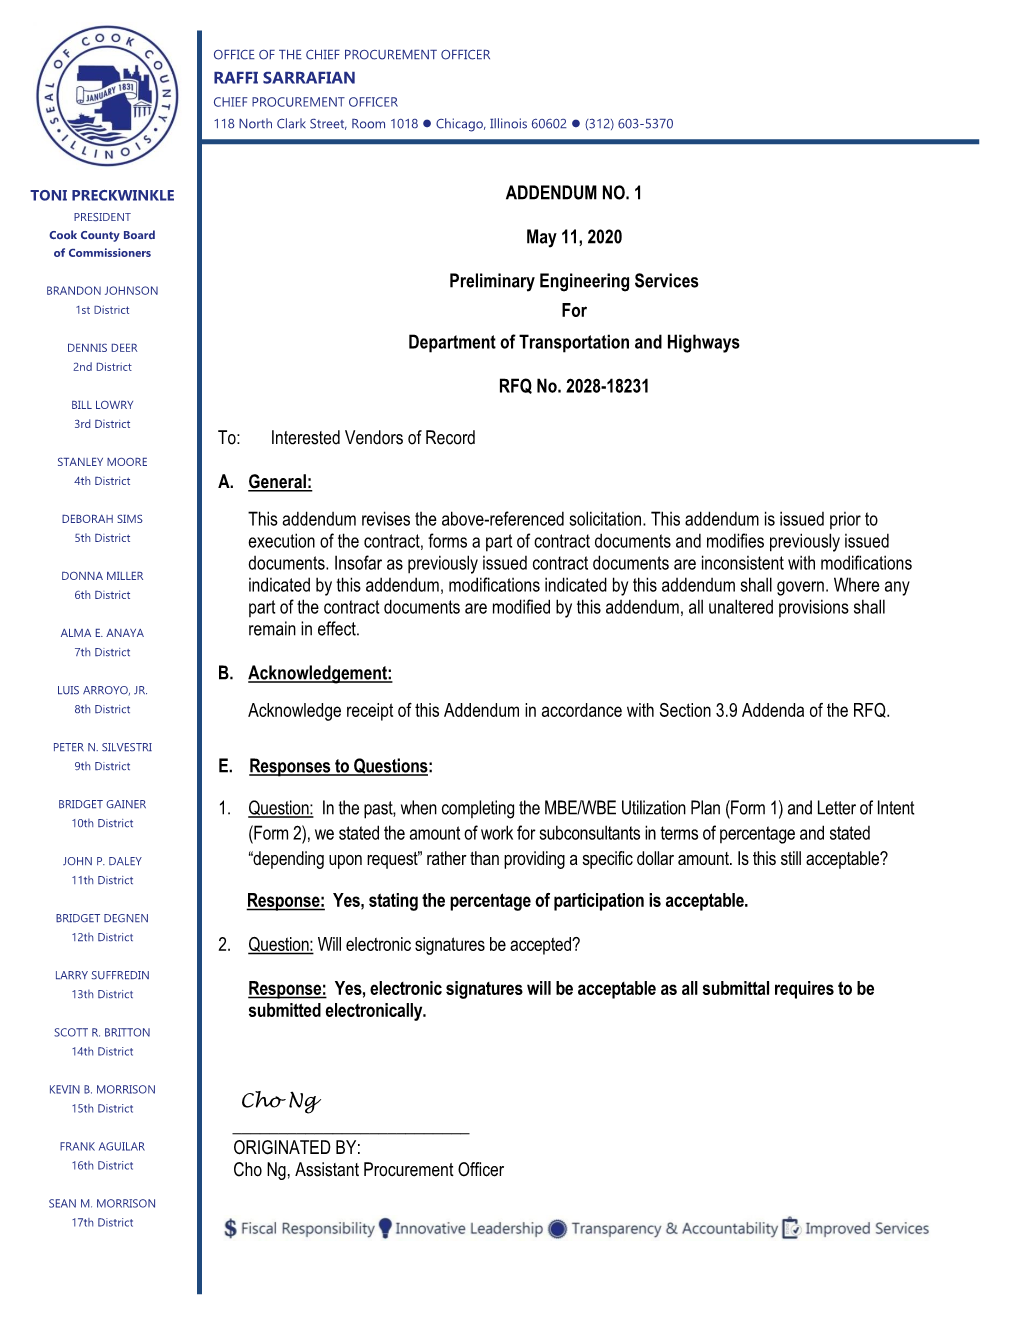 ADDENDUM NO. 1 May 11, 2020 Preliminary Engineering Services